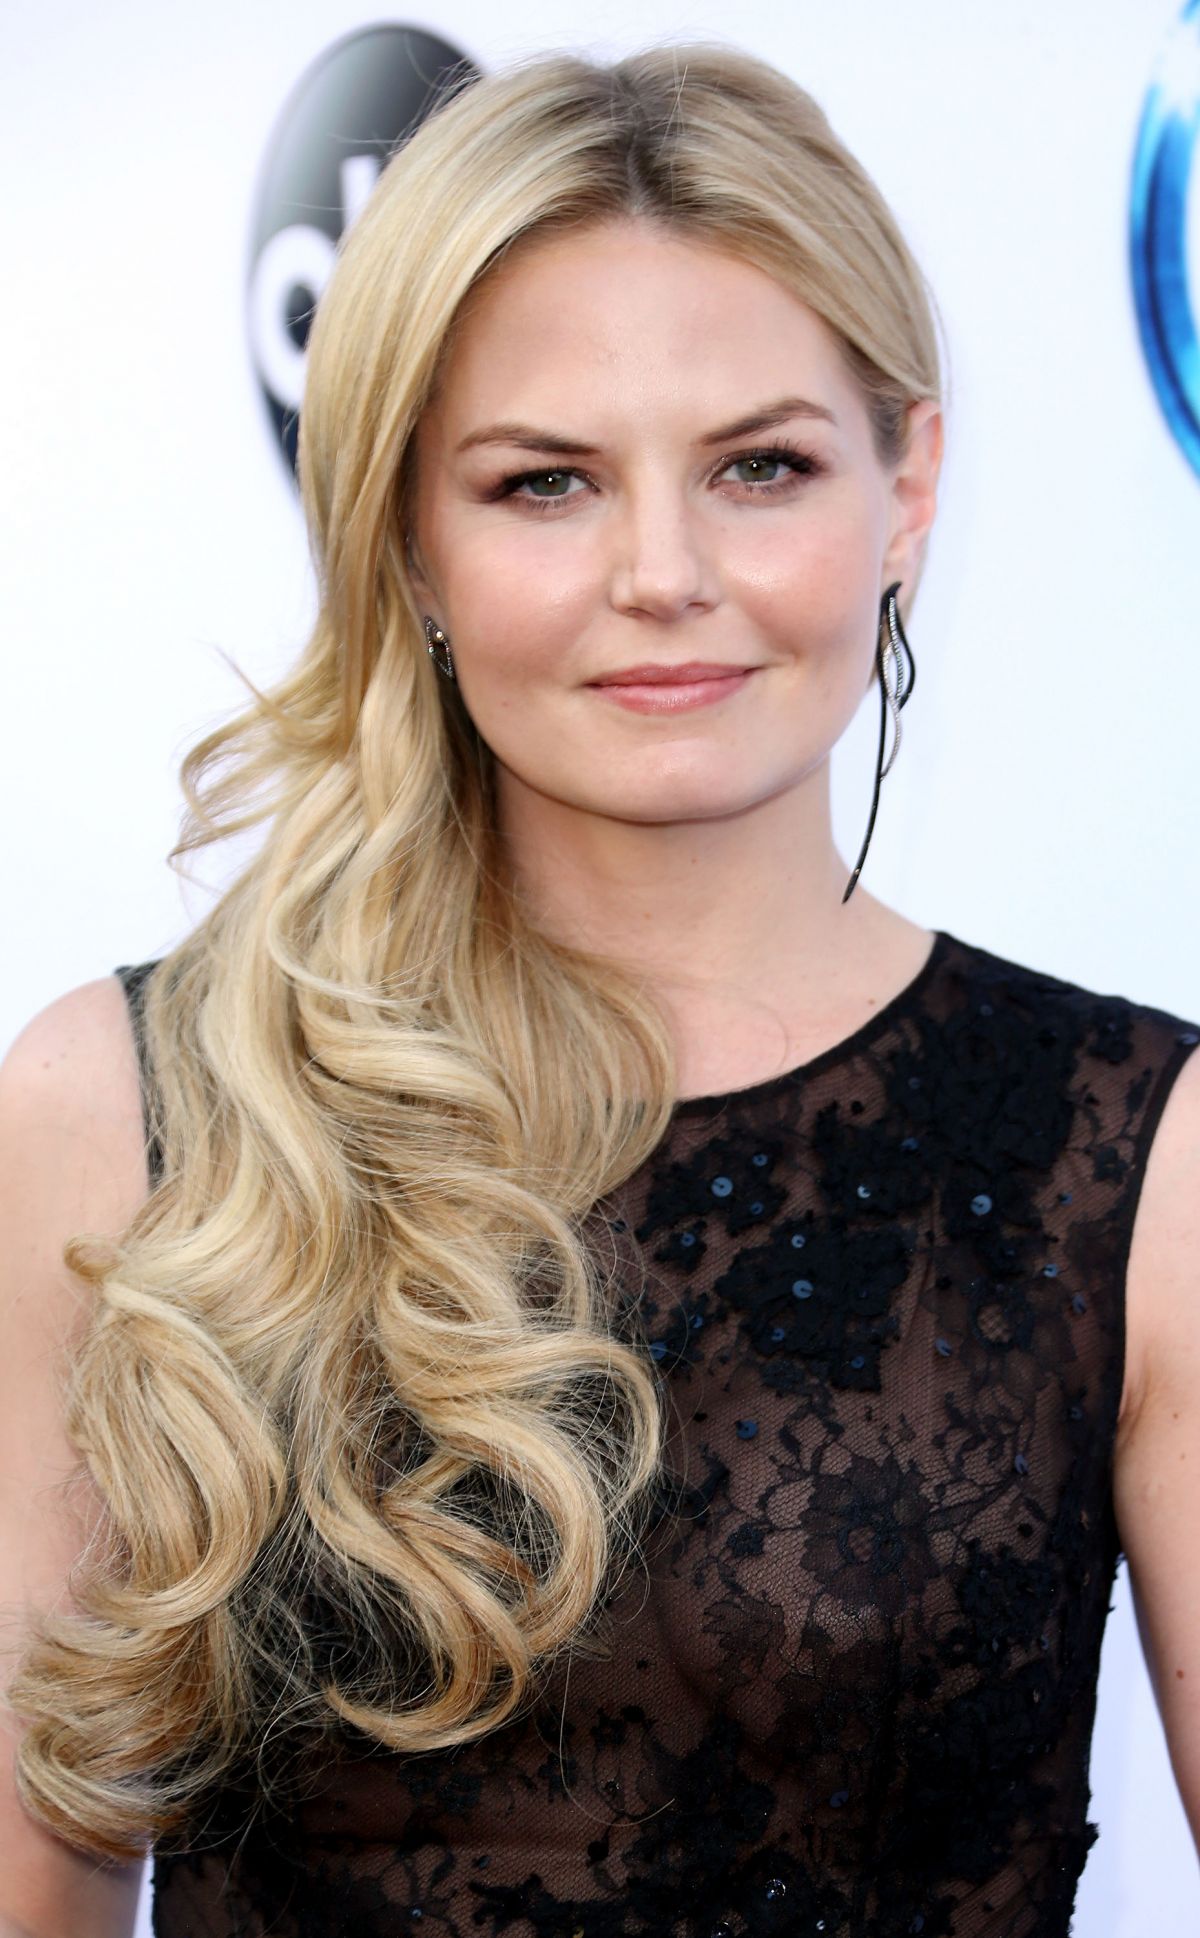 Once Upon A Time Jennifer-morrison-at-once-upon-a-time-season-4-screening-_1